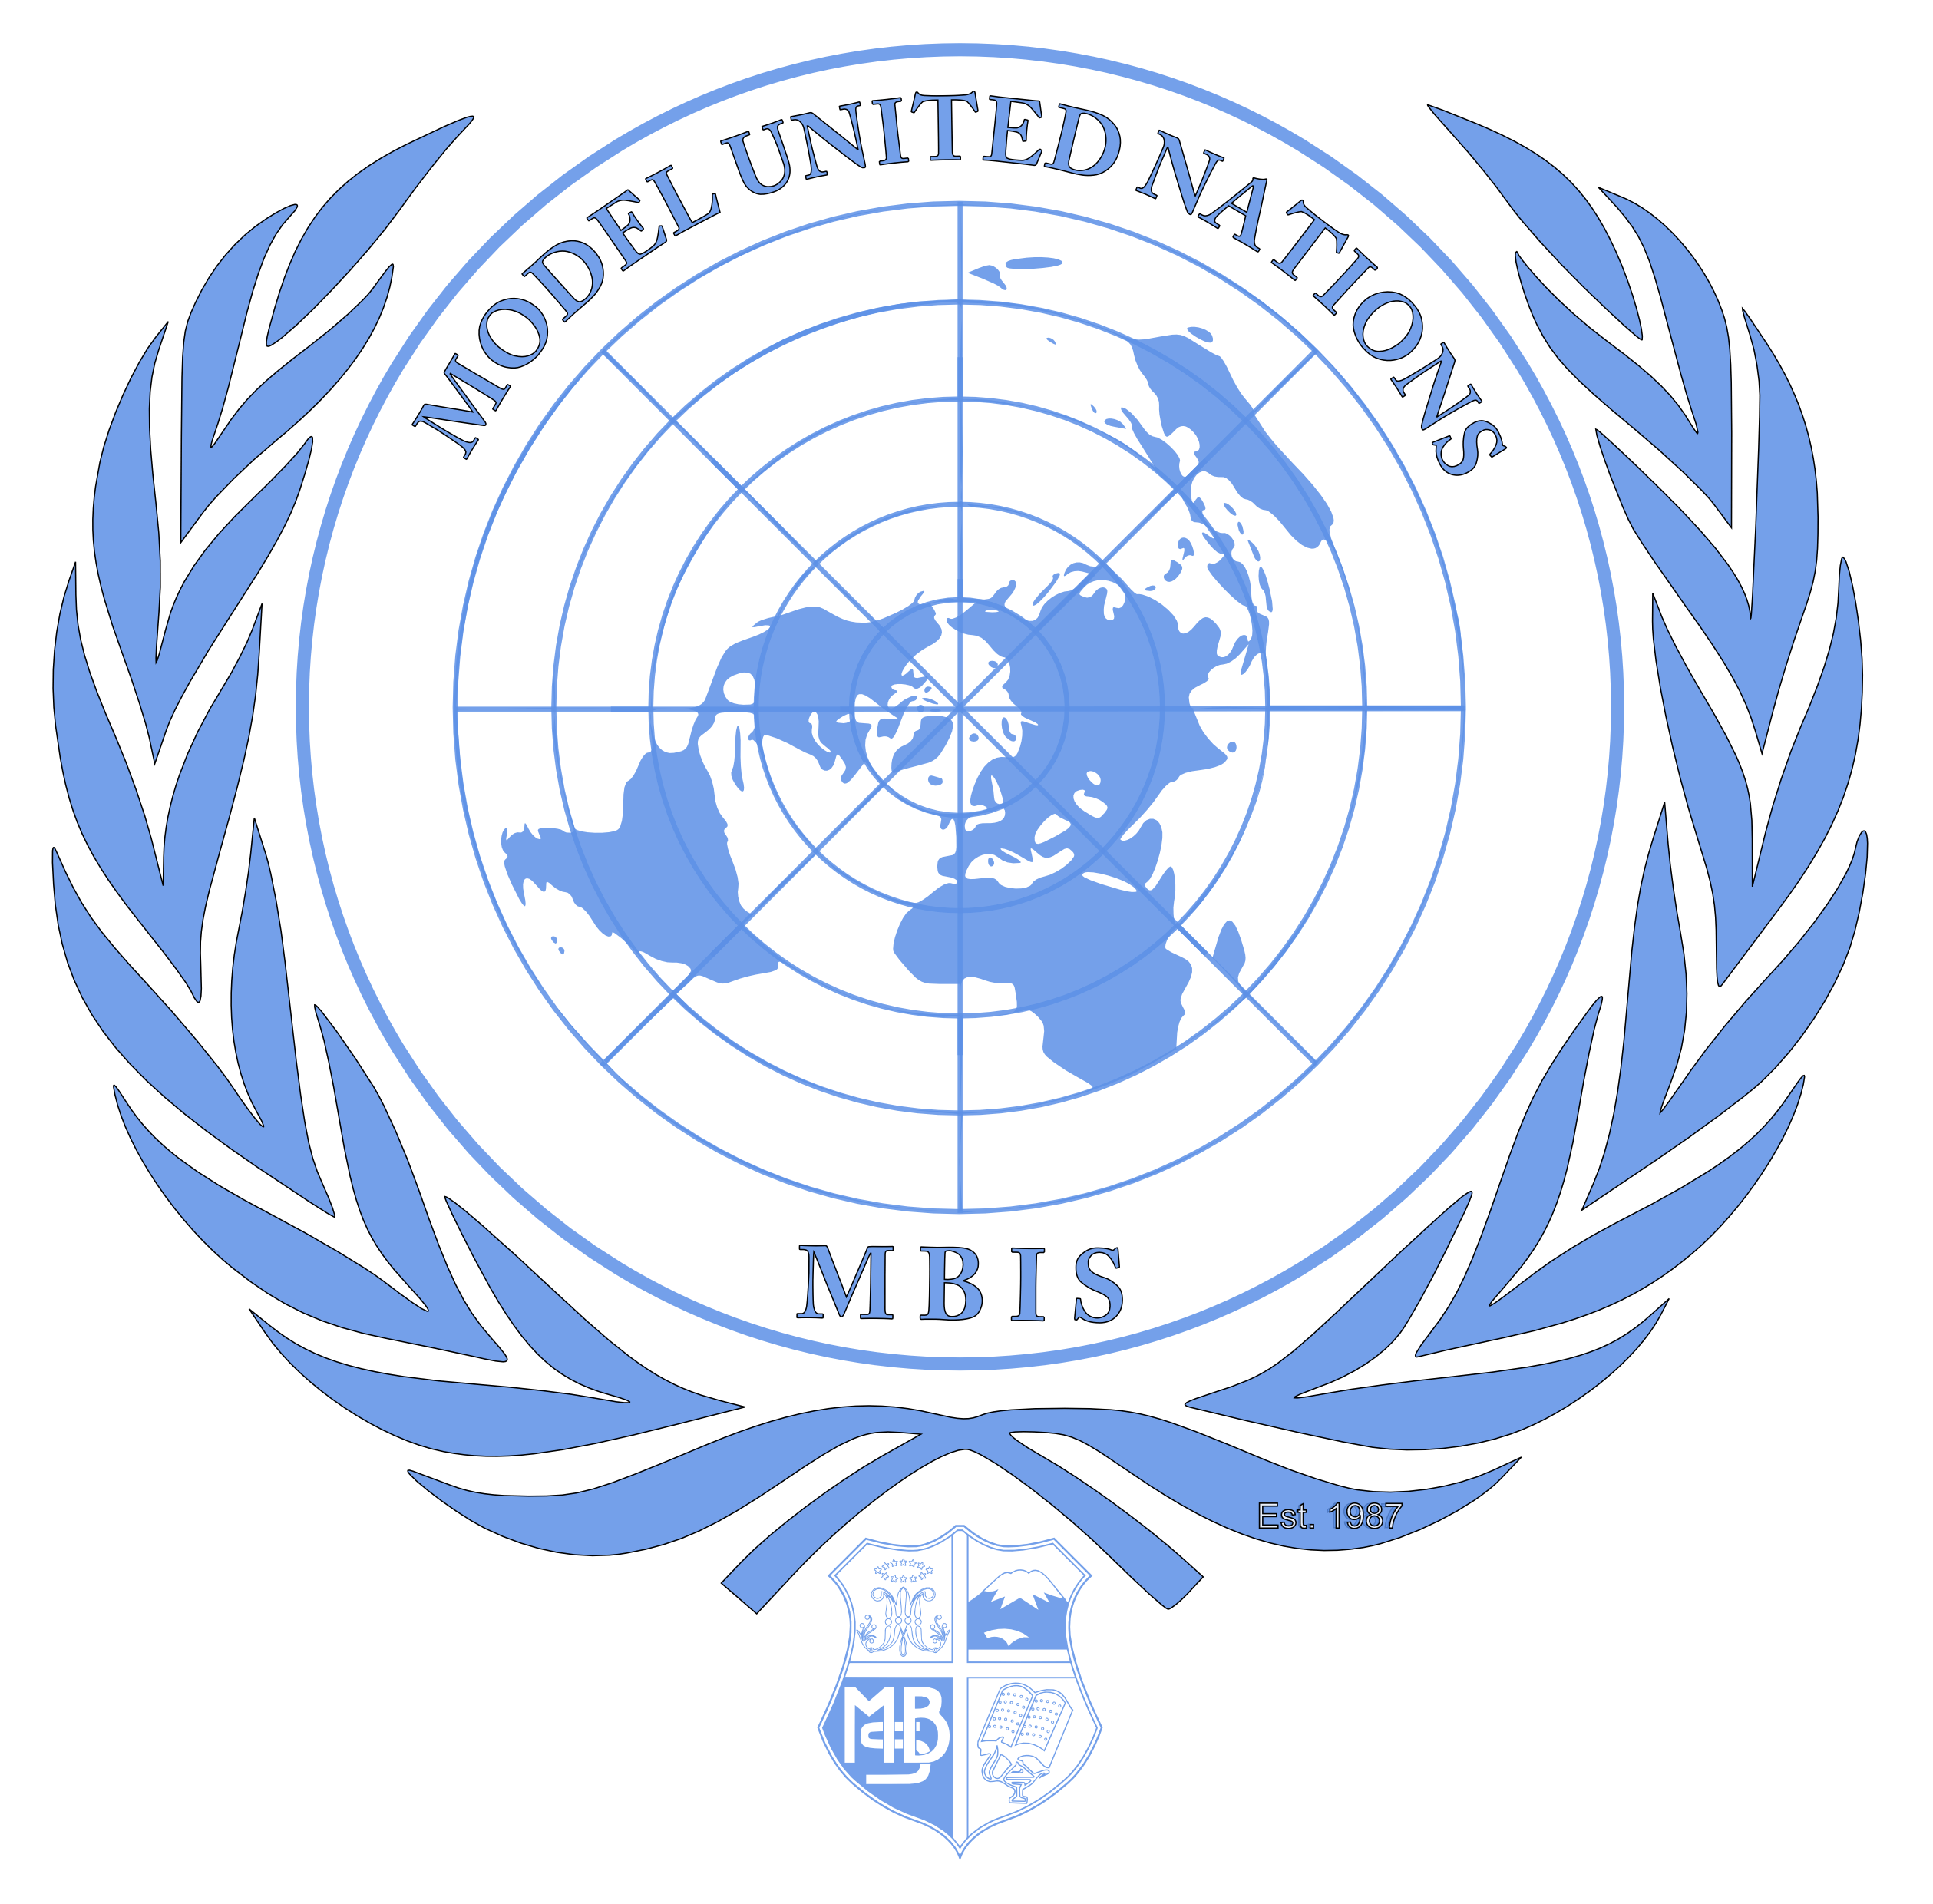 Model United Nations Logo - MSUB to host Model United Nations Conference